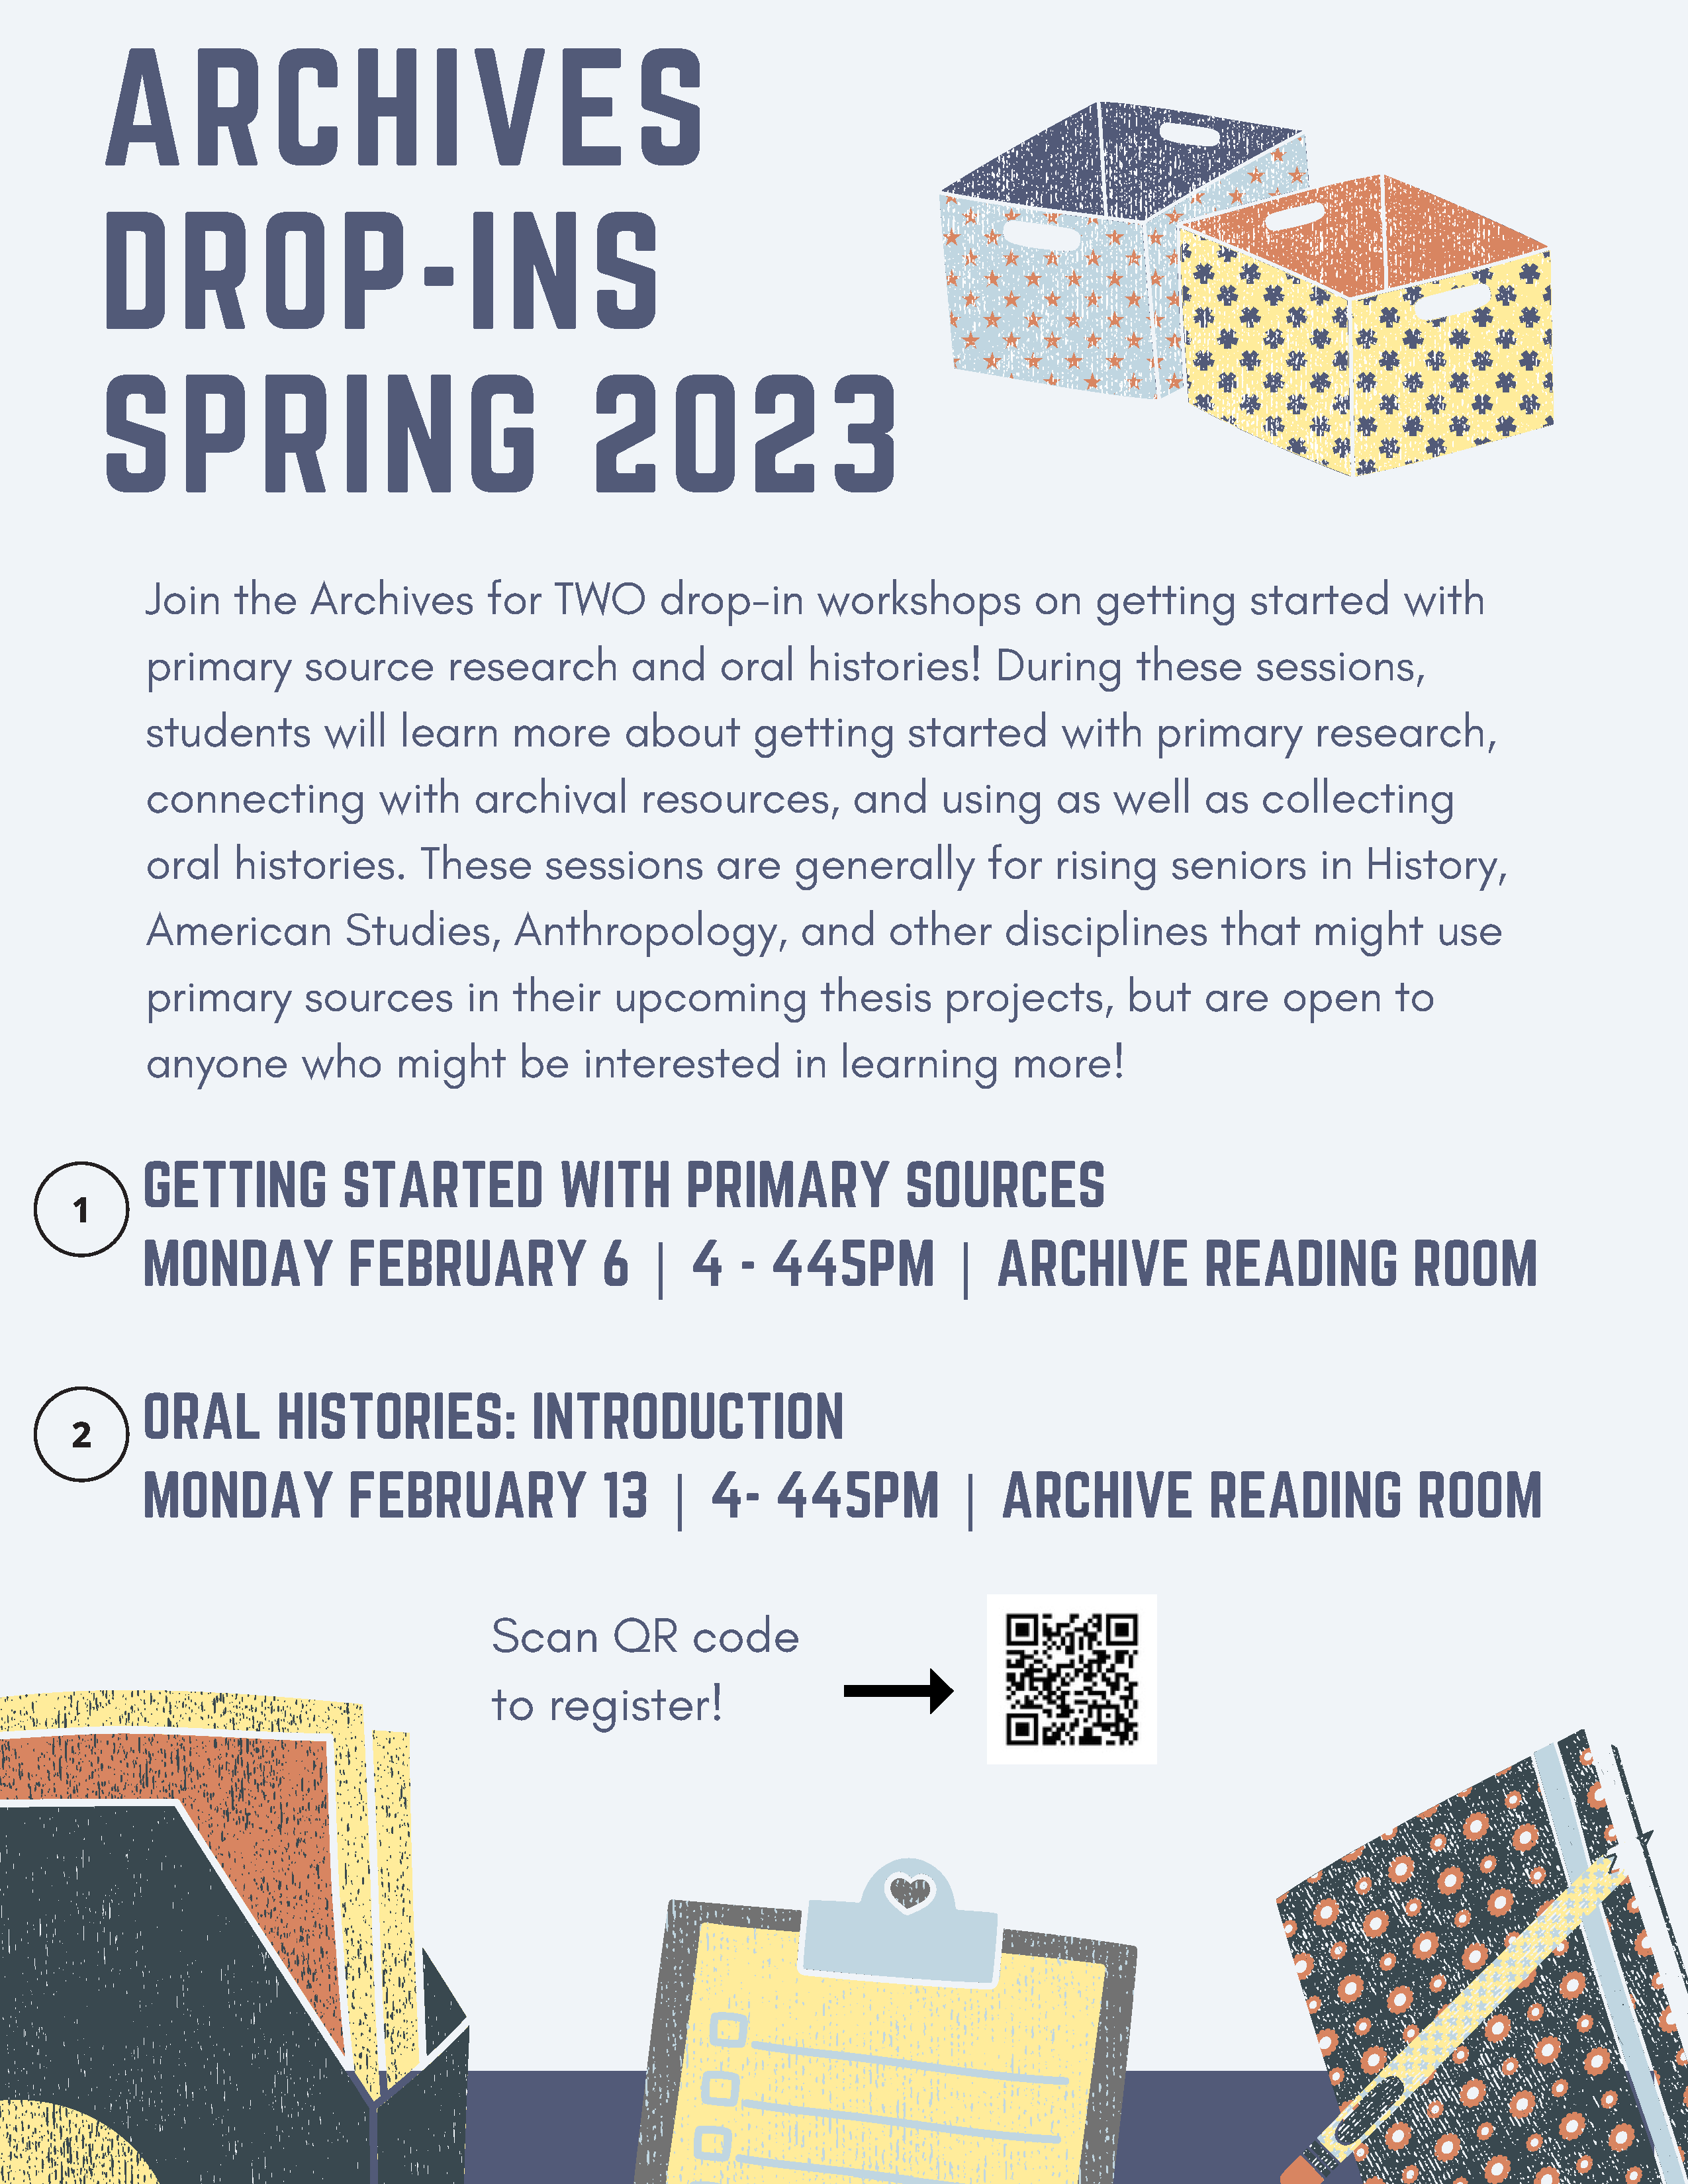 Flyer for two archives drop-in sessions